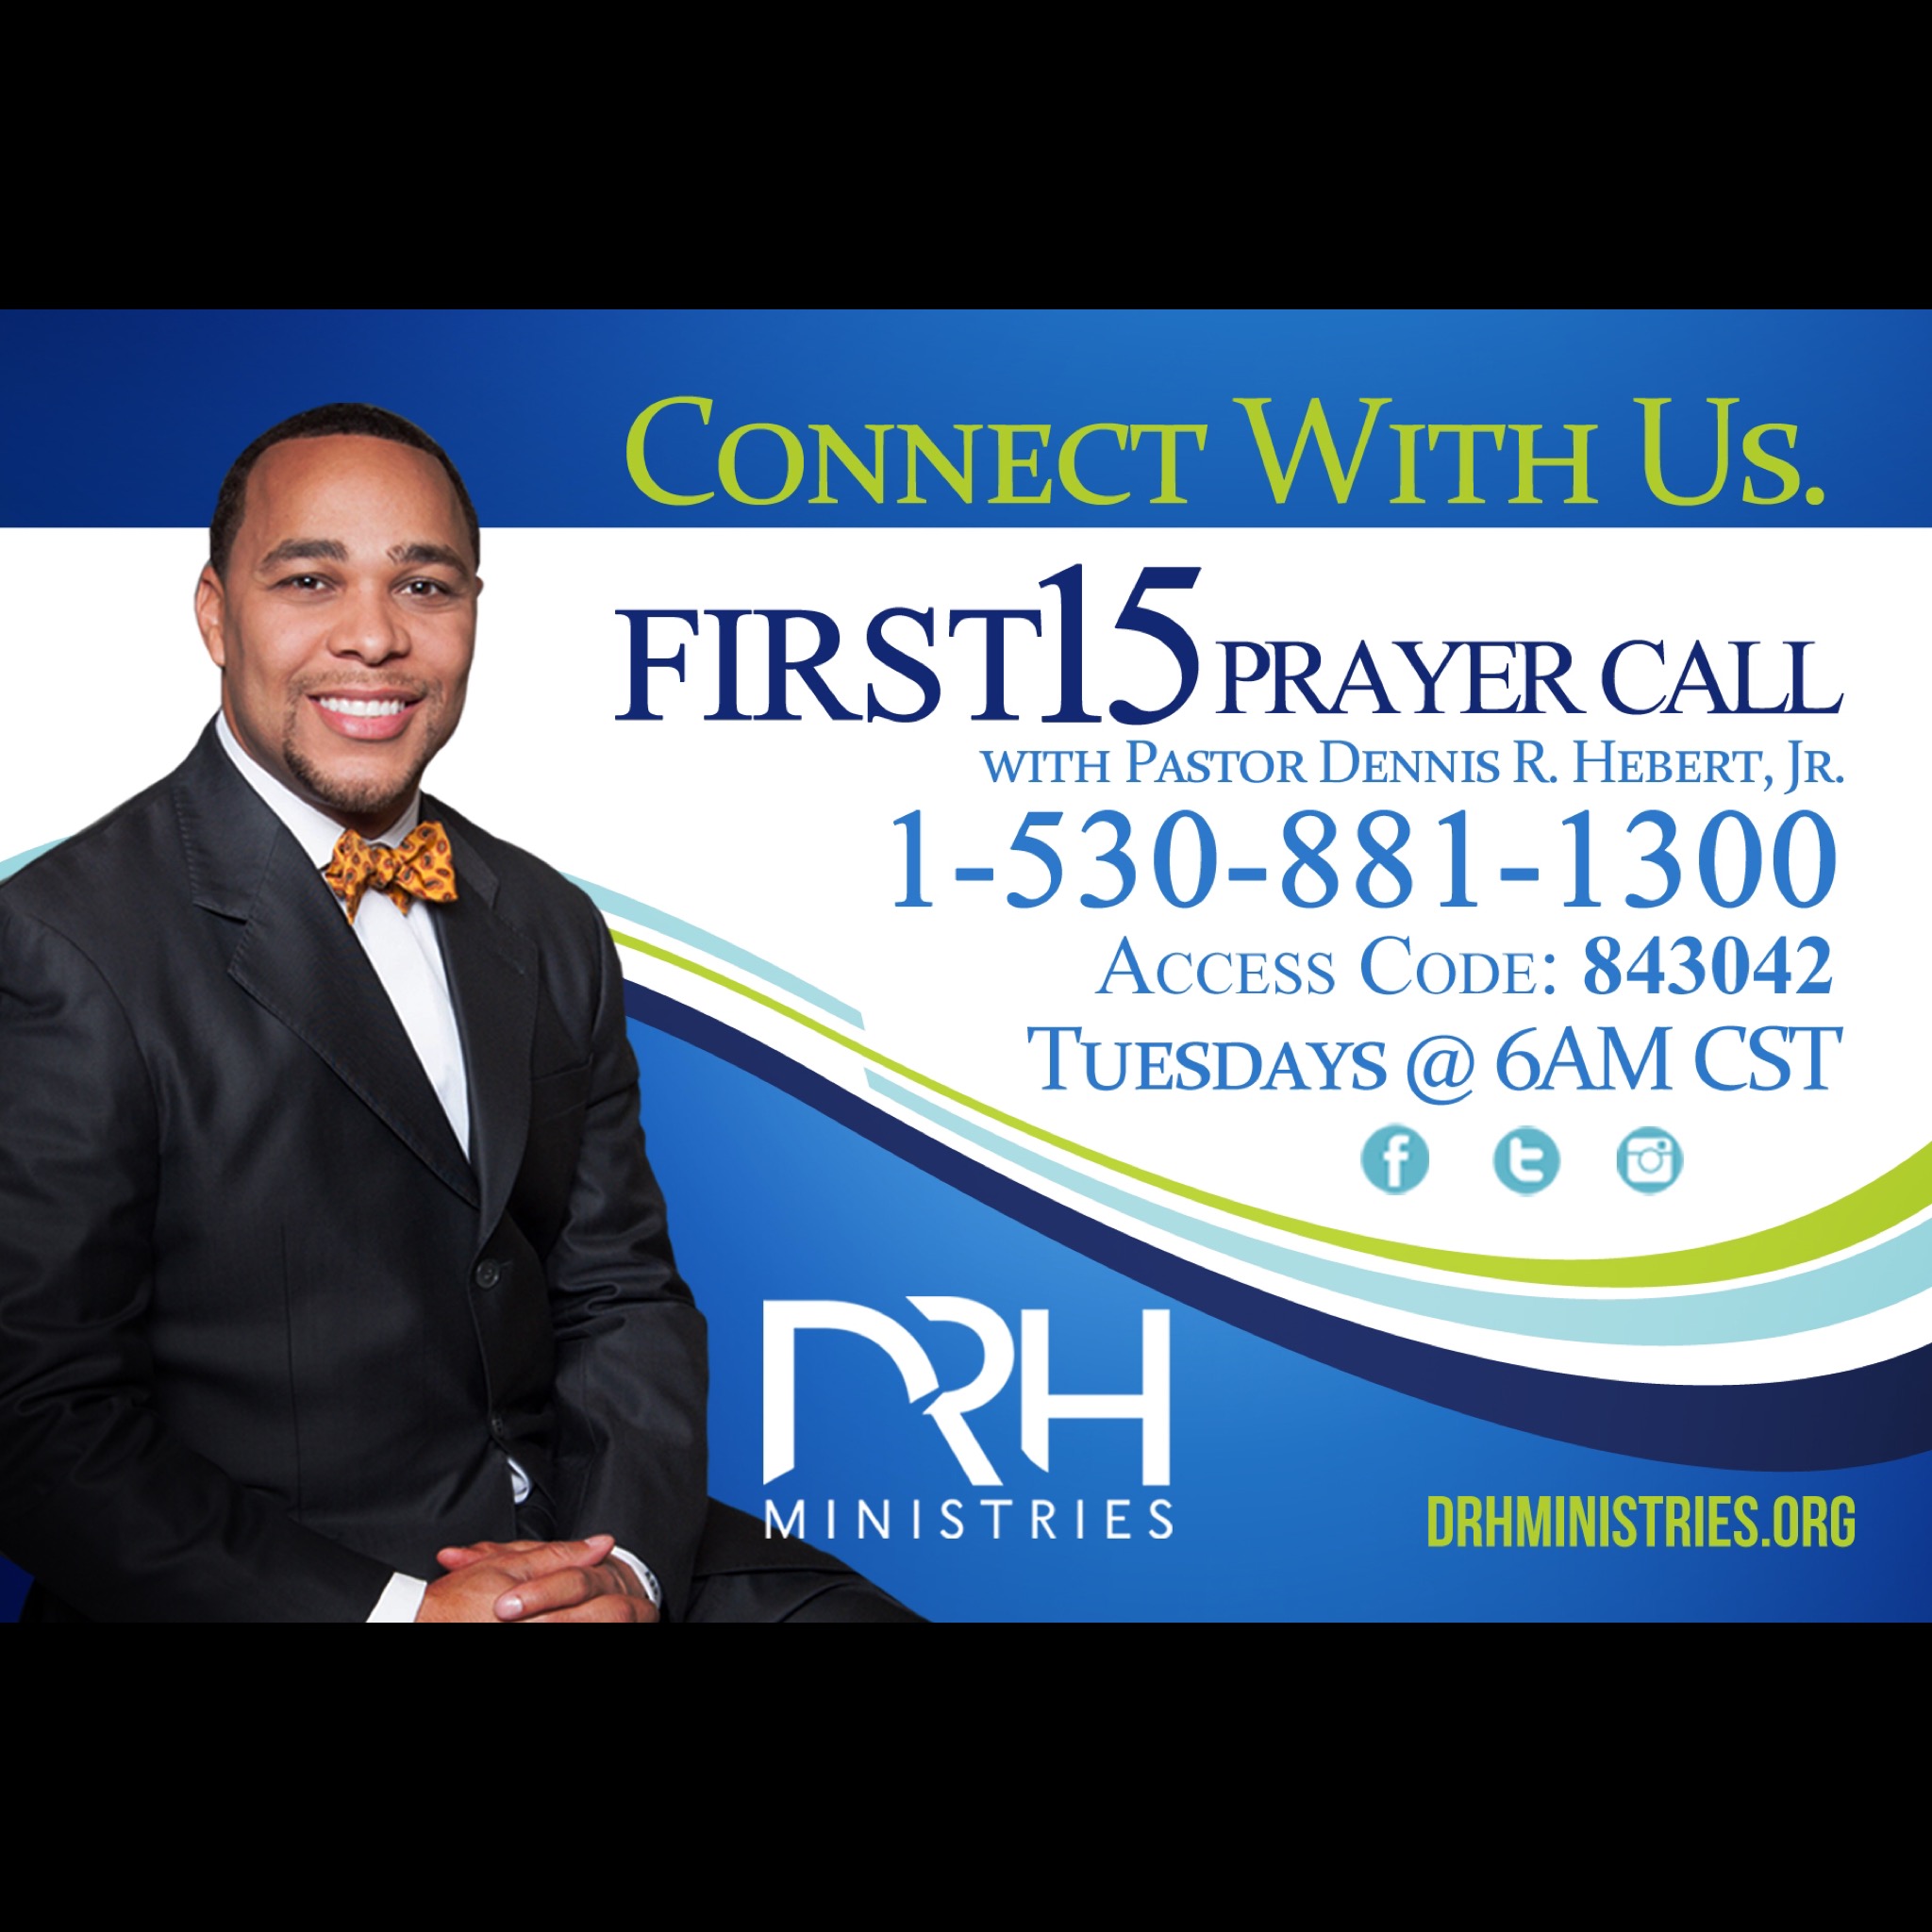 First 15 Prayer Call: From Busy To Productive